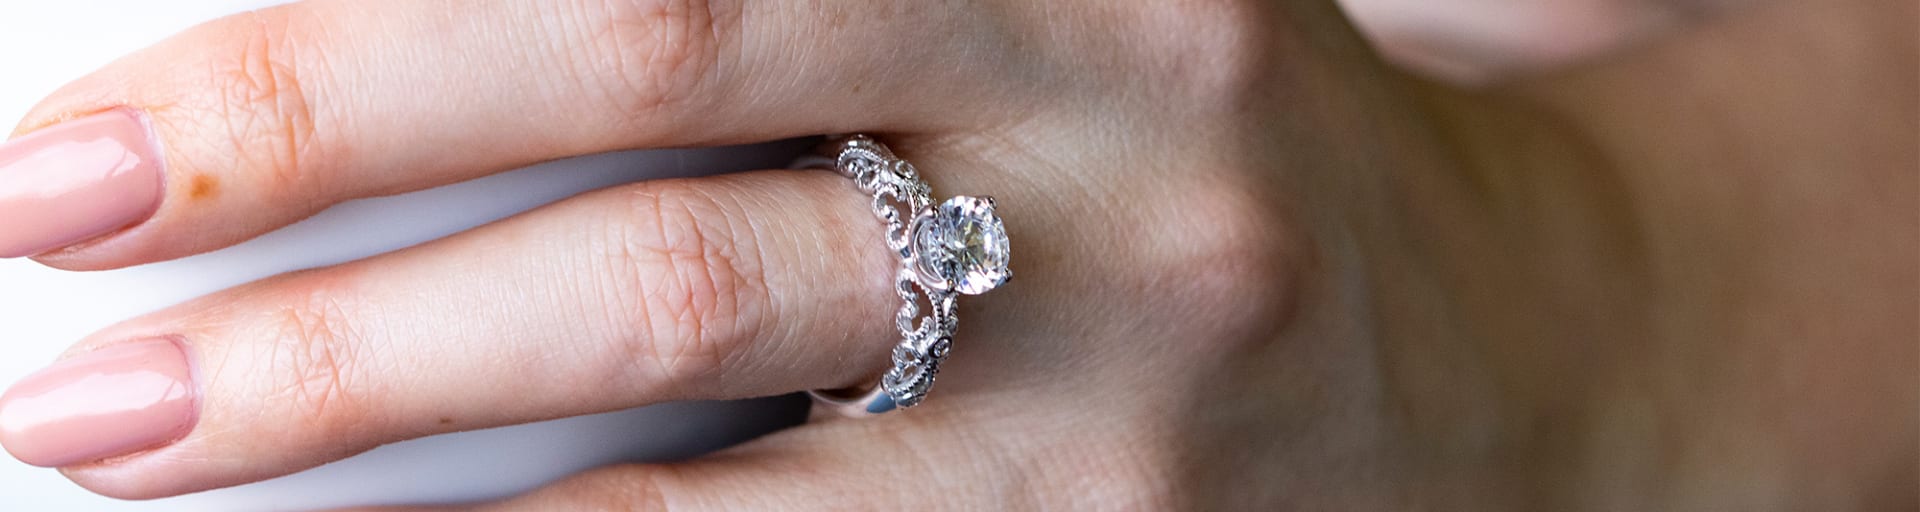 What Is a Bezel Setting? The Insider’s Guide to This Secure Gemstone Hug